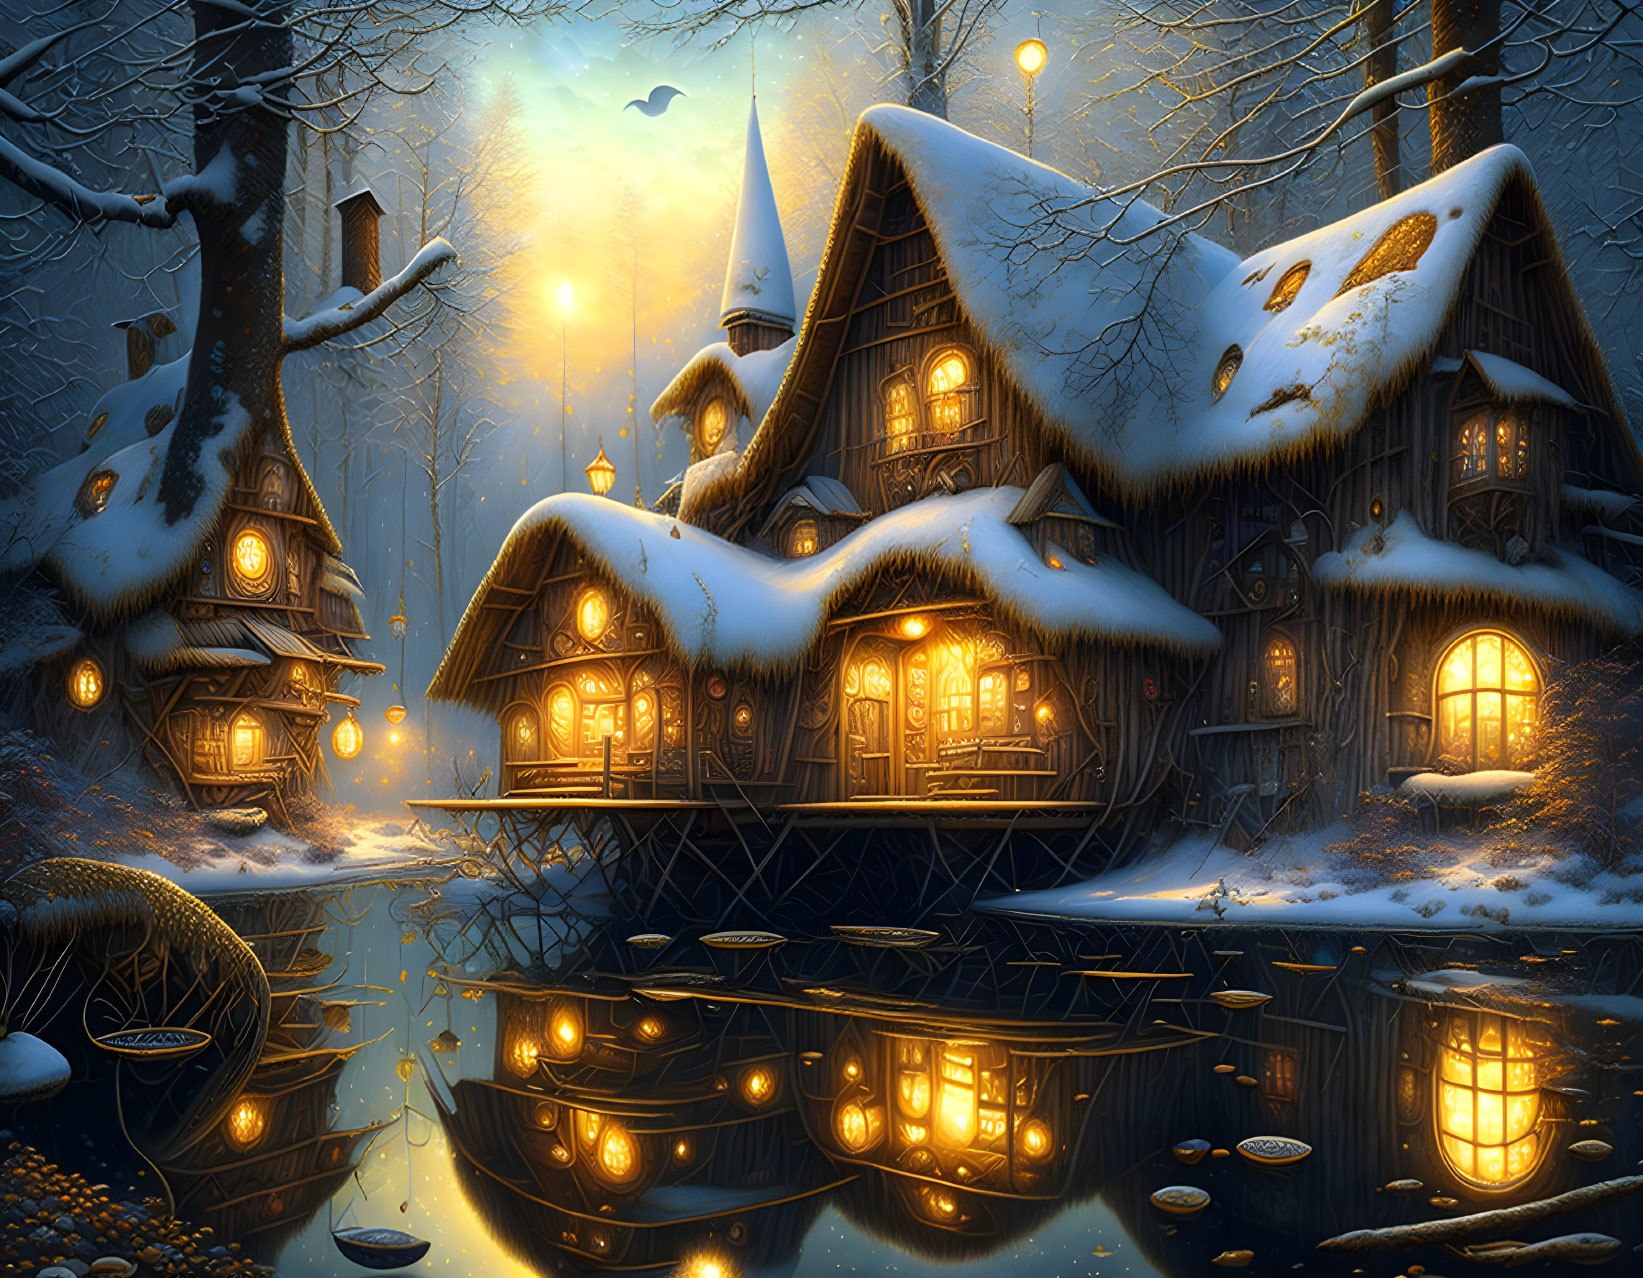 Tranquil forest pond with snow-covered cottages at dusk